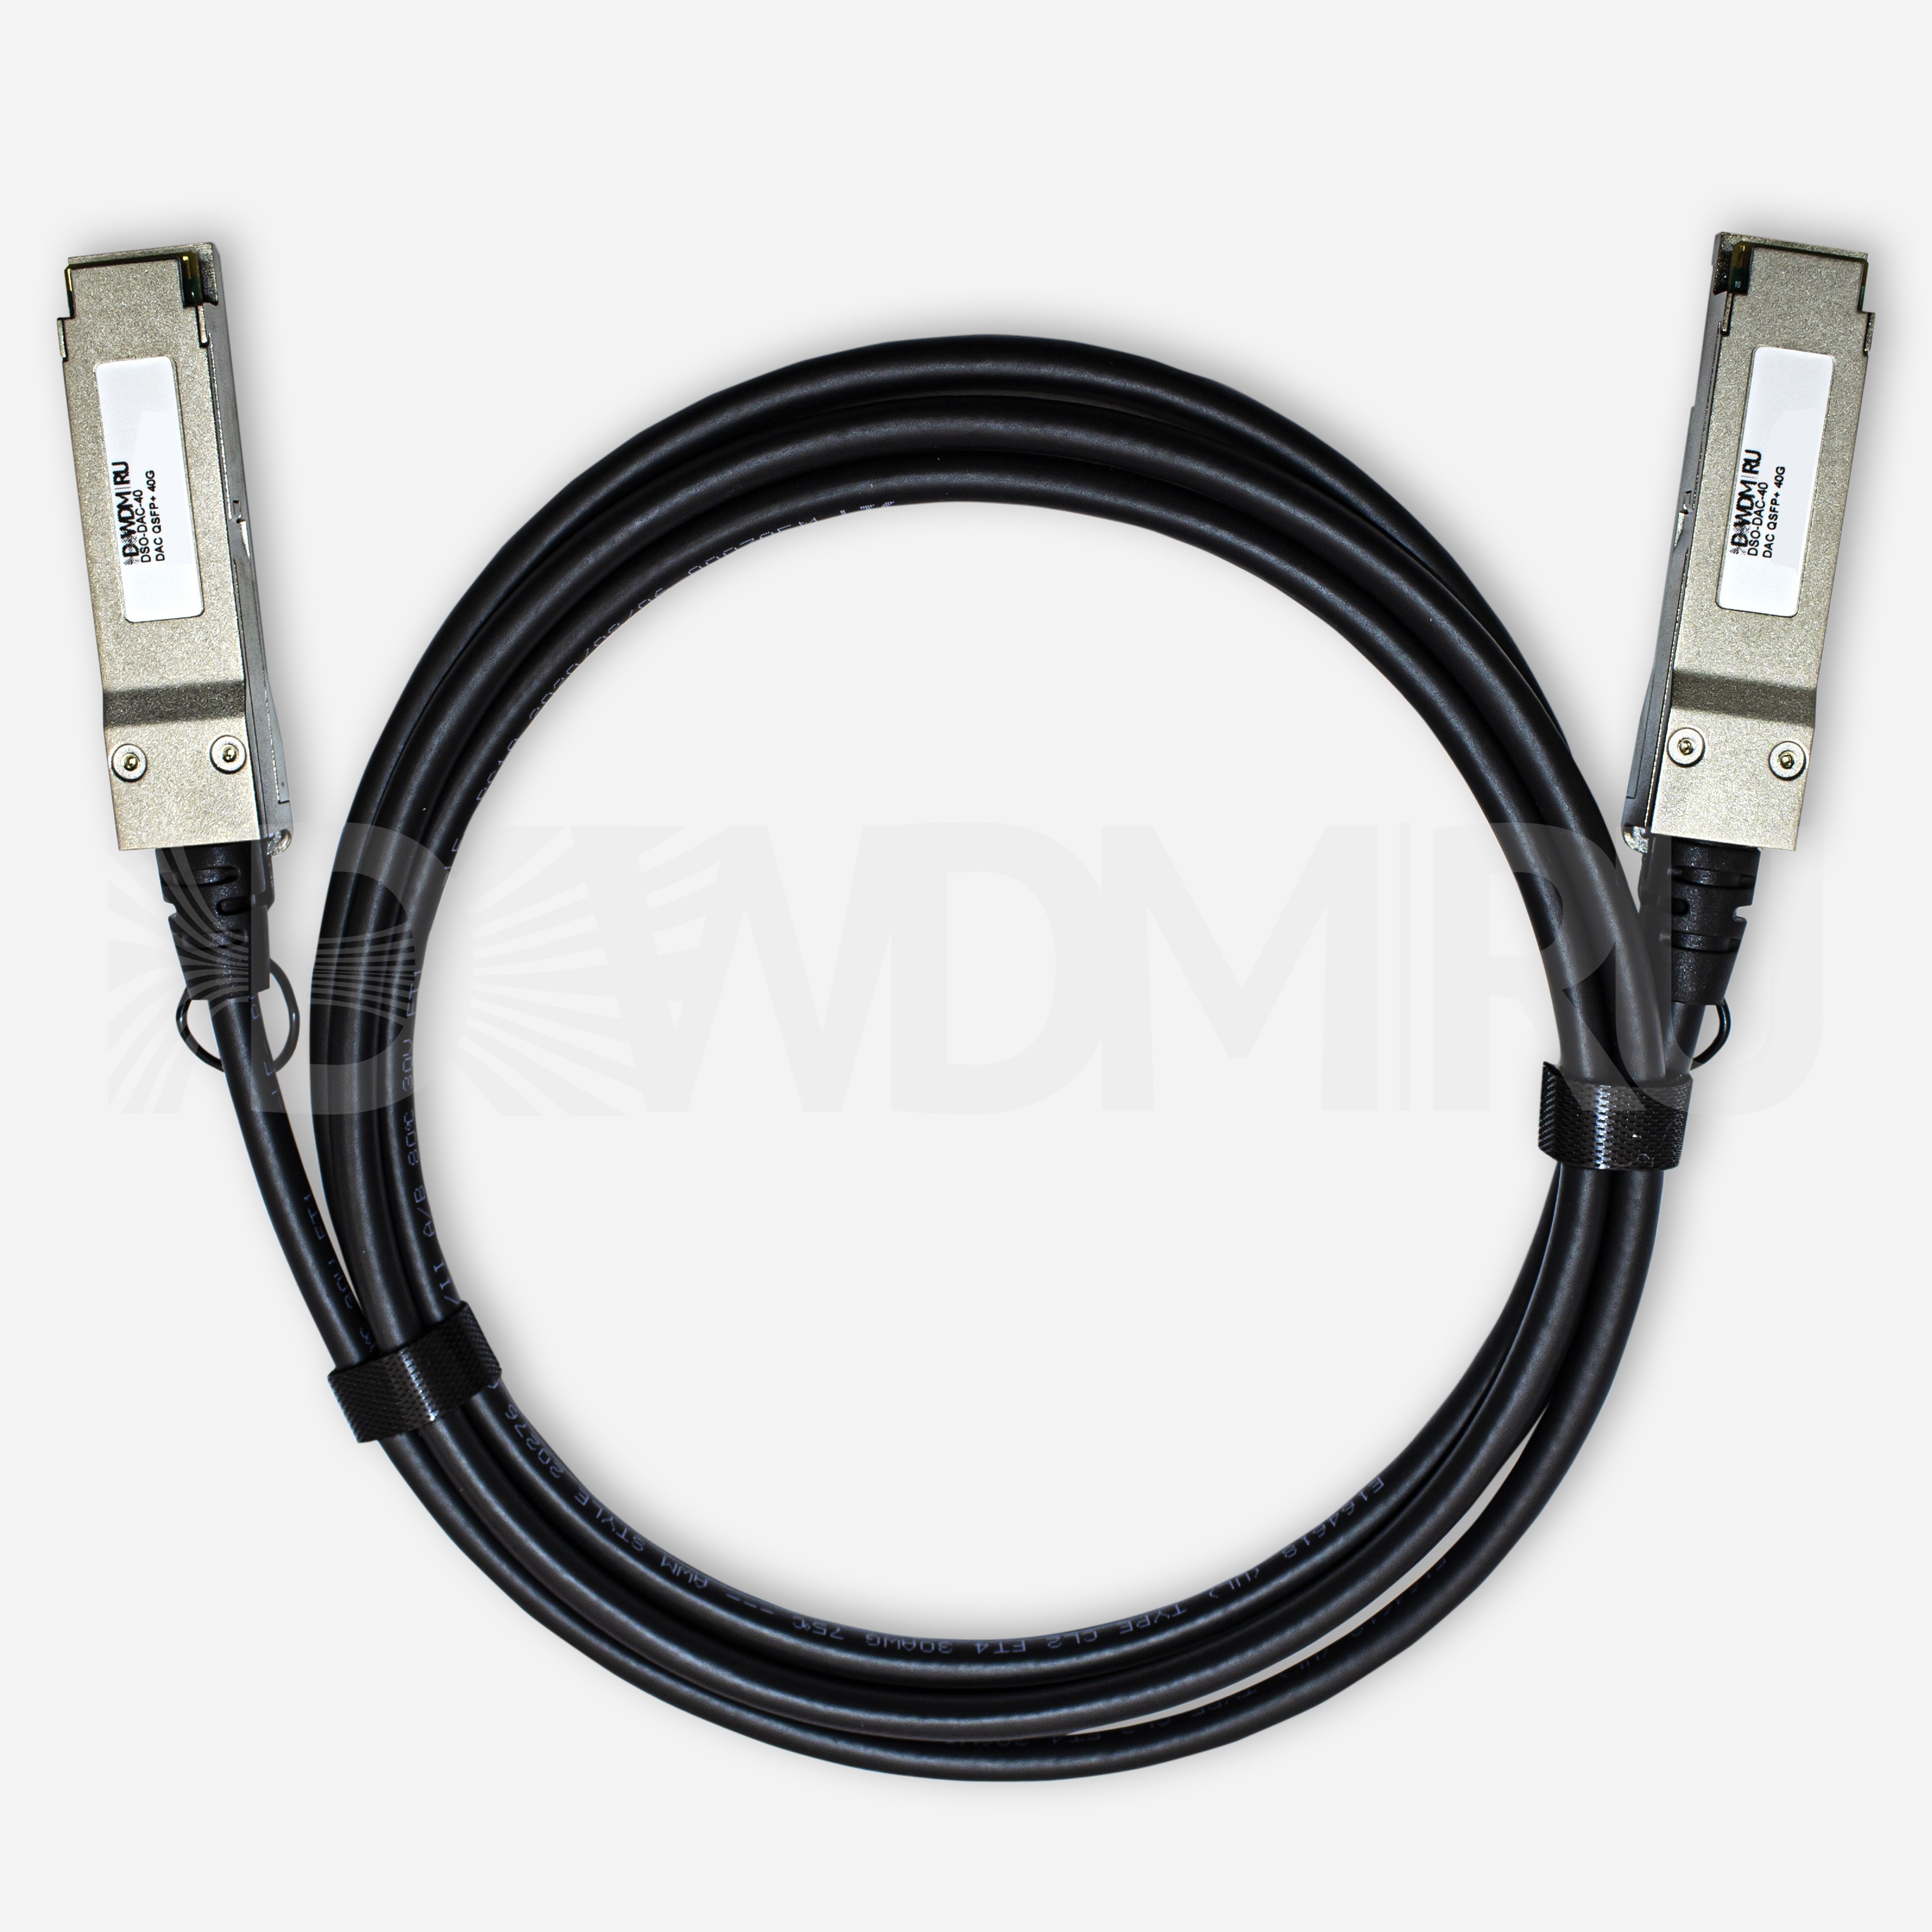 Кабель Direct Attached, QSFP+, 28AWG, 40 Гб/с, 5 м - ДВДМ.РУ (DSO-DAC-40-5)